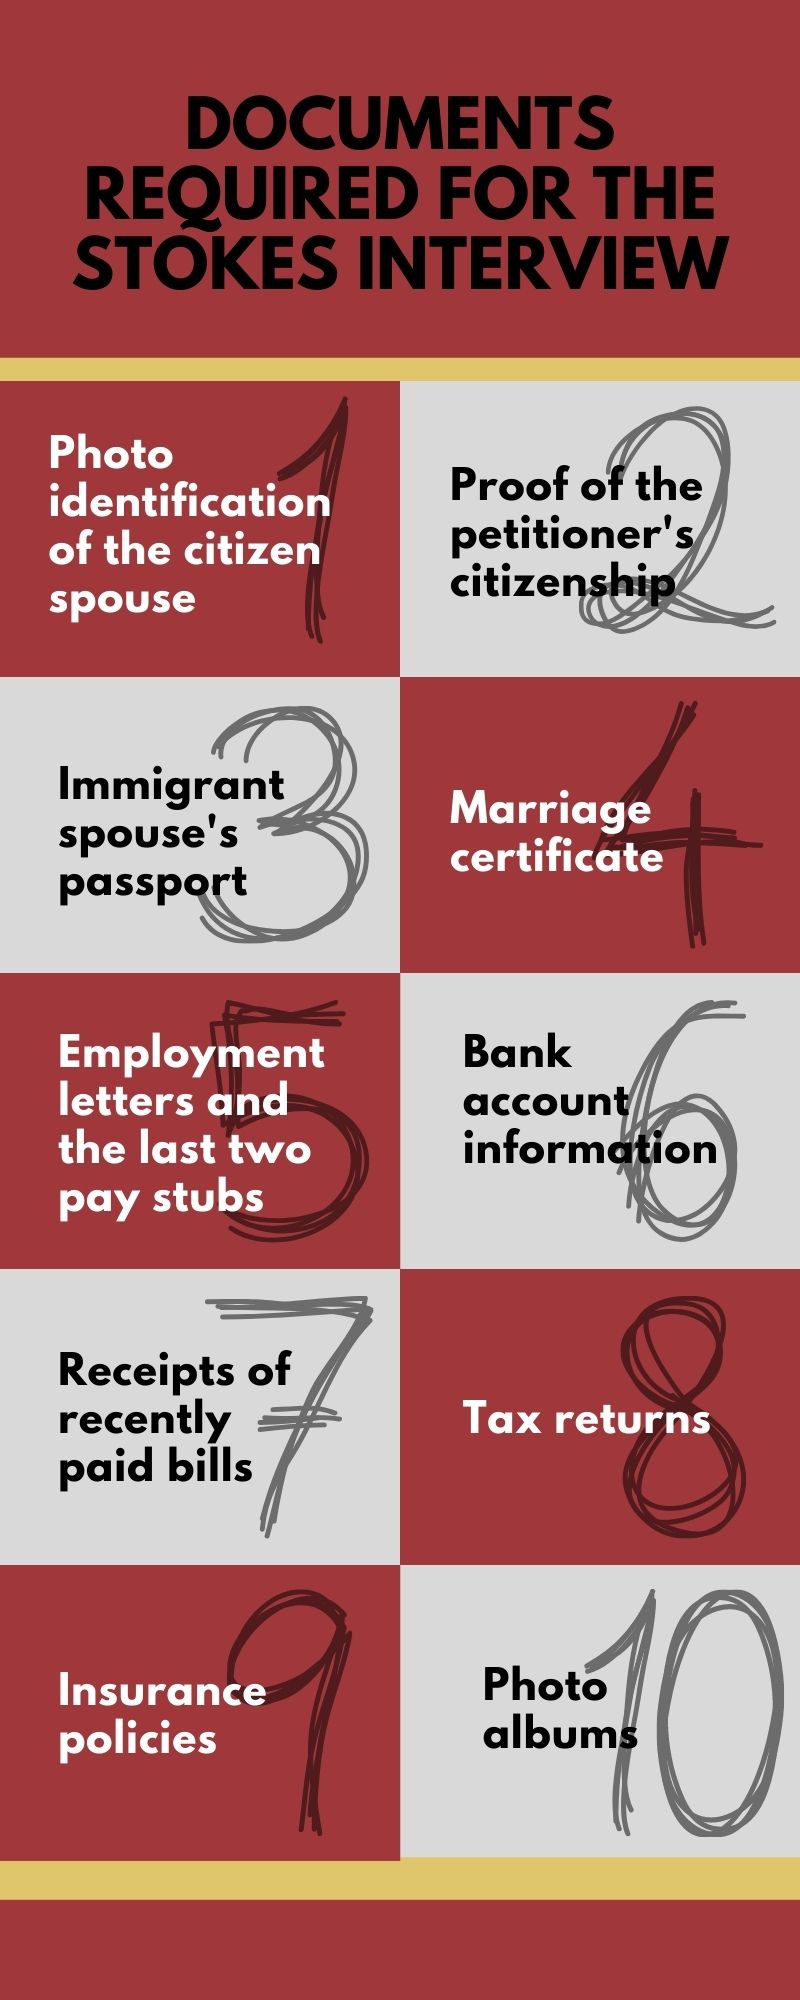 Infographic: Documents required for the Stokes Interview. Photo identification of the citizen spouse, proof of the petitioner’s citizenship, immigrant spouse’s passport, marriage certificate, employment letters and the last two pay stubs, bank account information, receipts of recently paid bills, tax returns, insurance policies, photo albums.